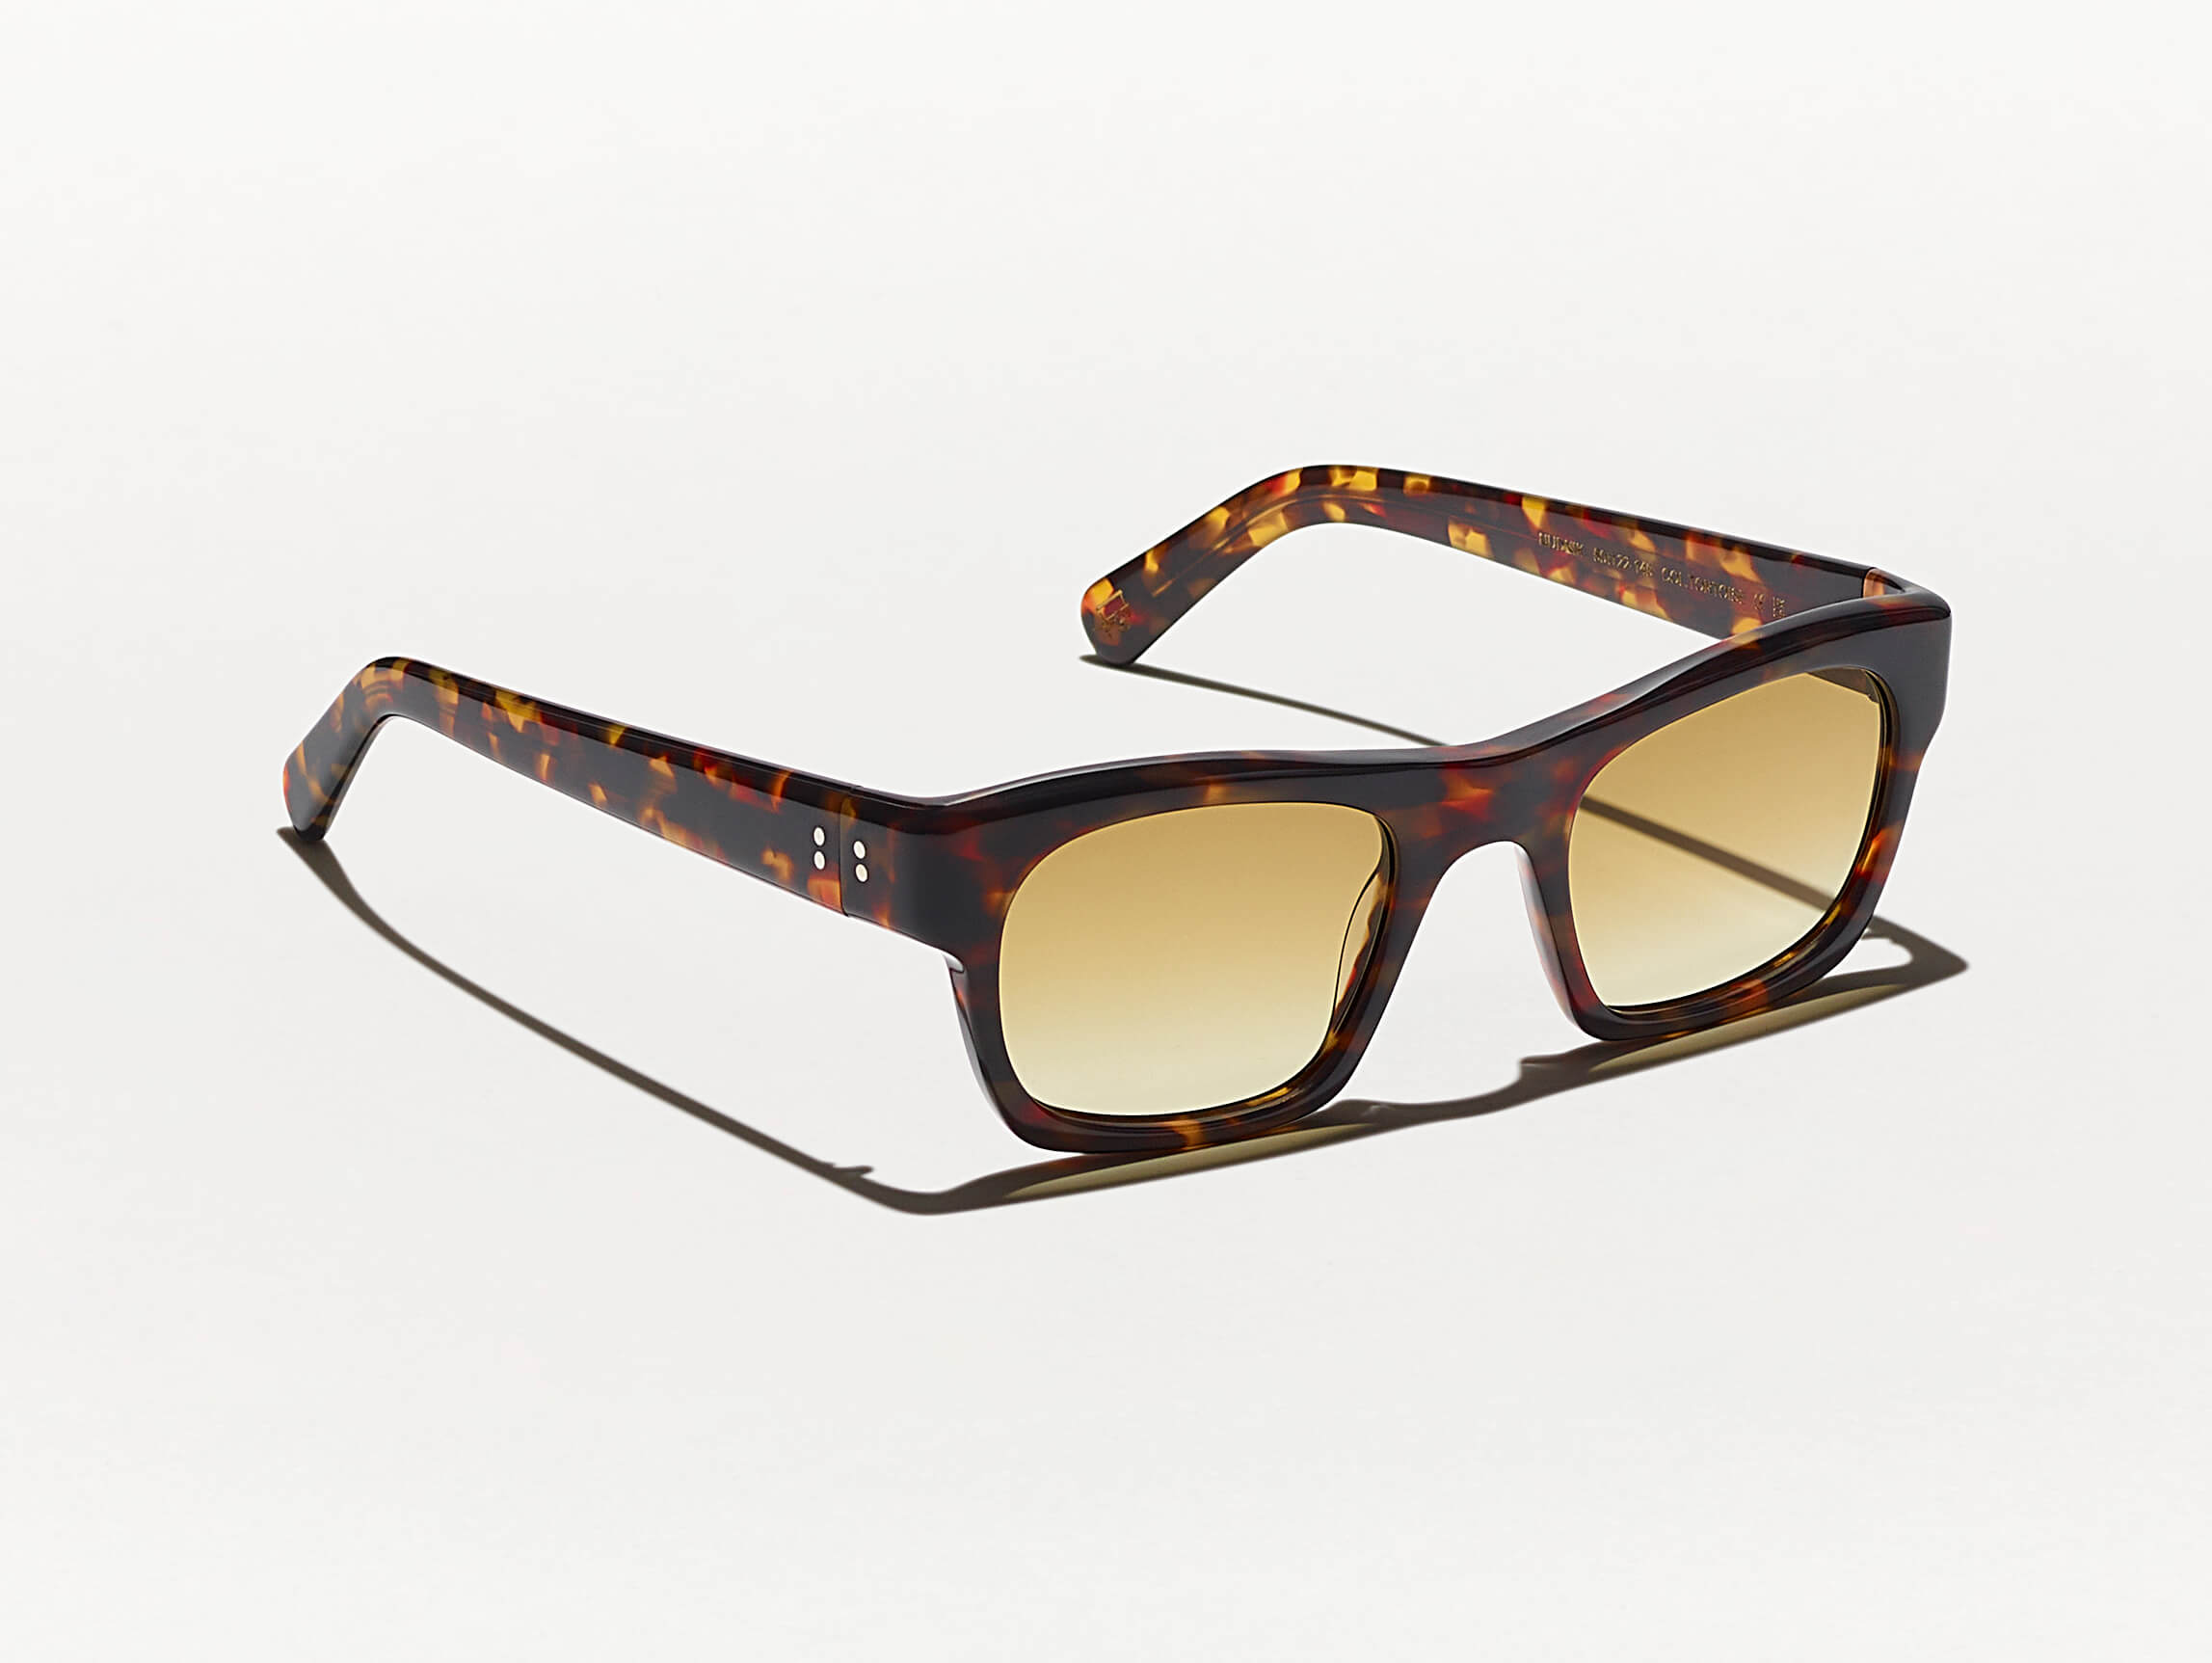 The NUDNIK SUN in Tortoise with Amber Tinted Lenses